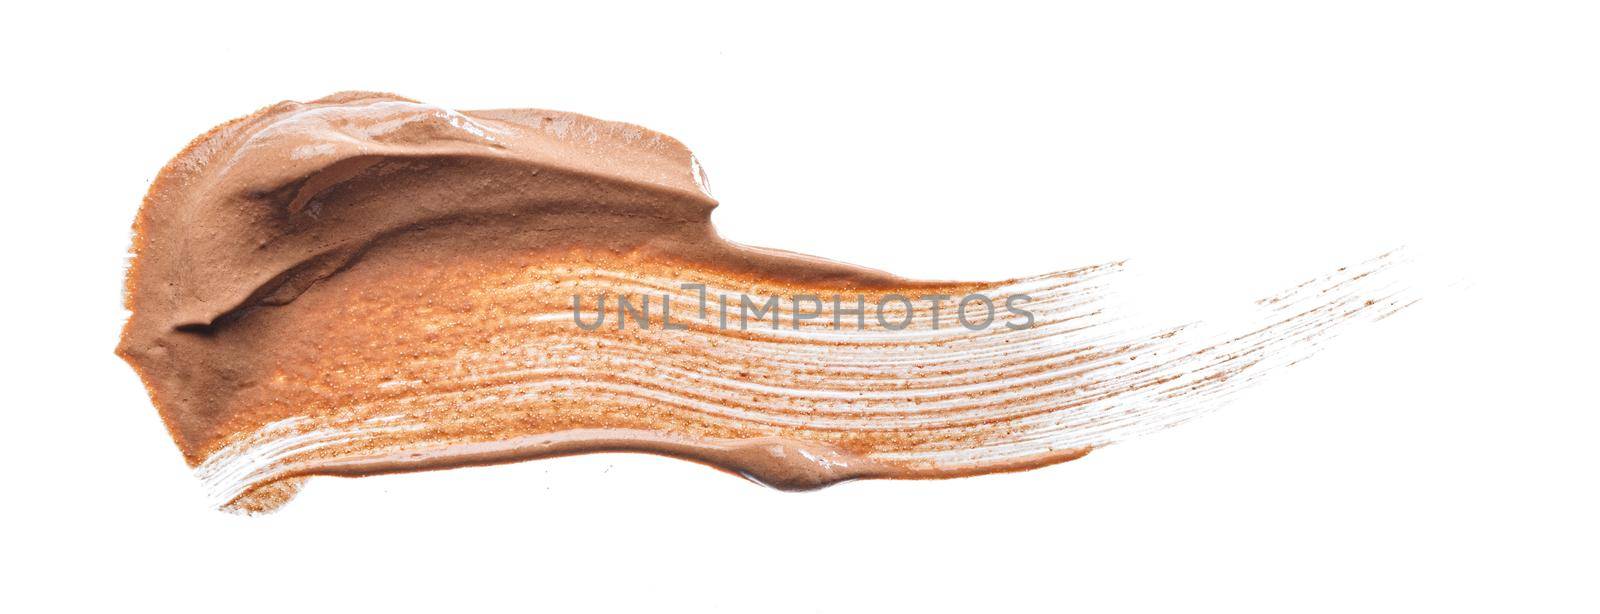 Smudged stain of a cream foundation isolated on white by Fabrikasimf